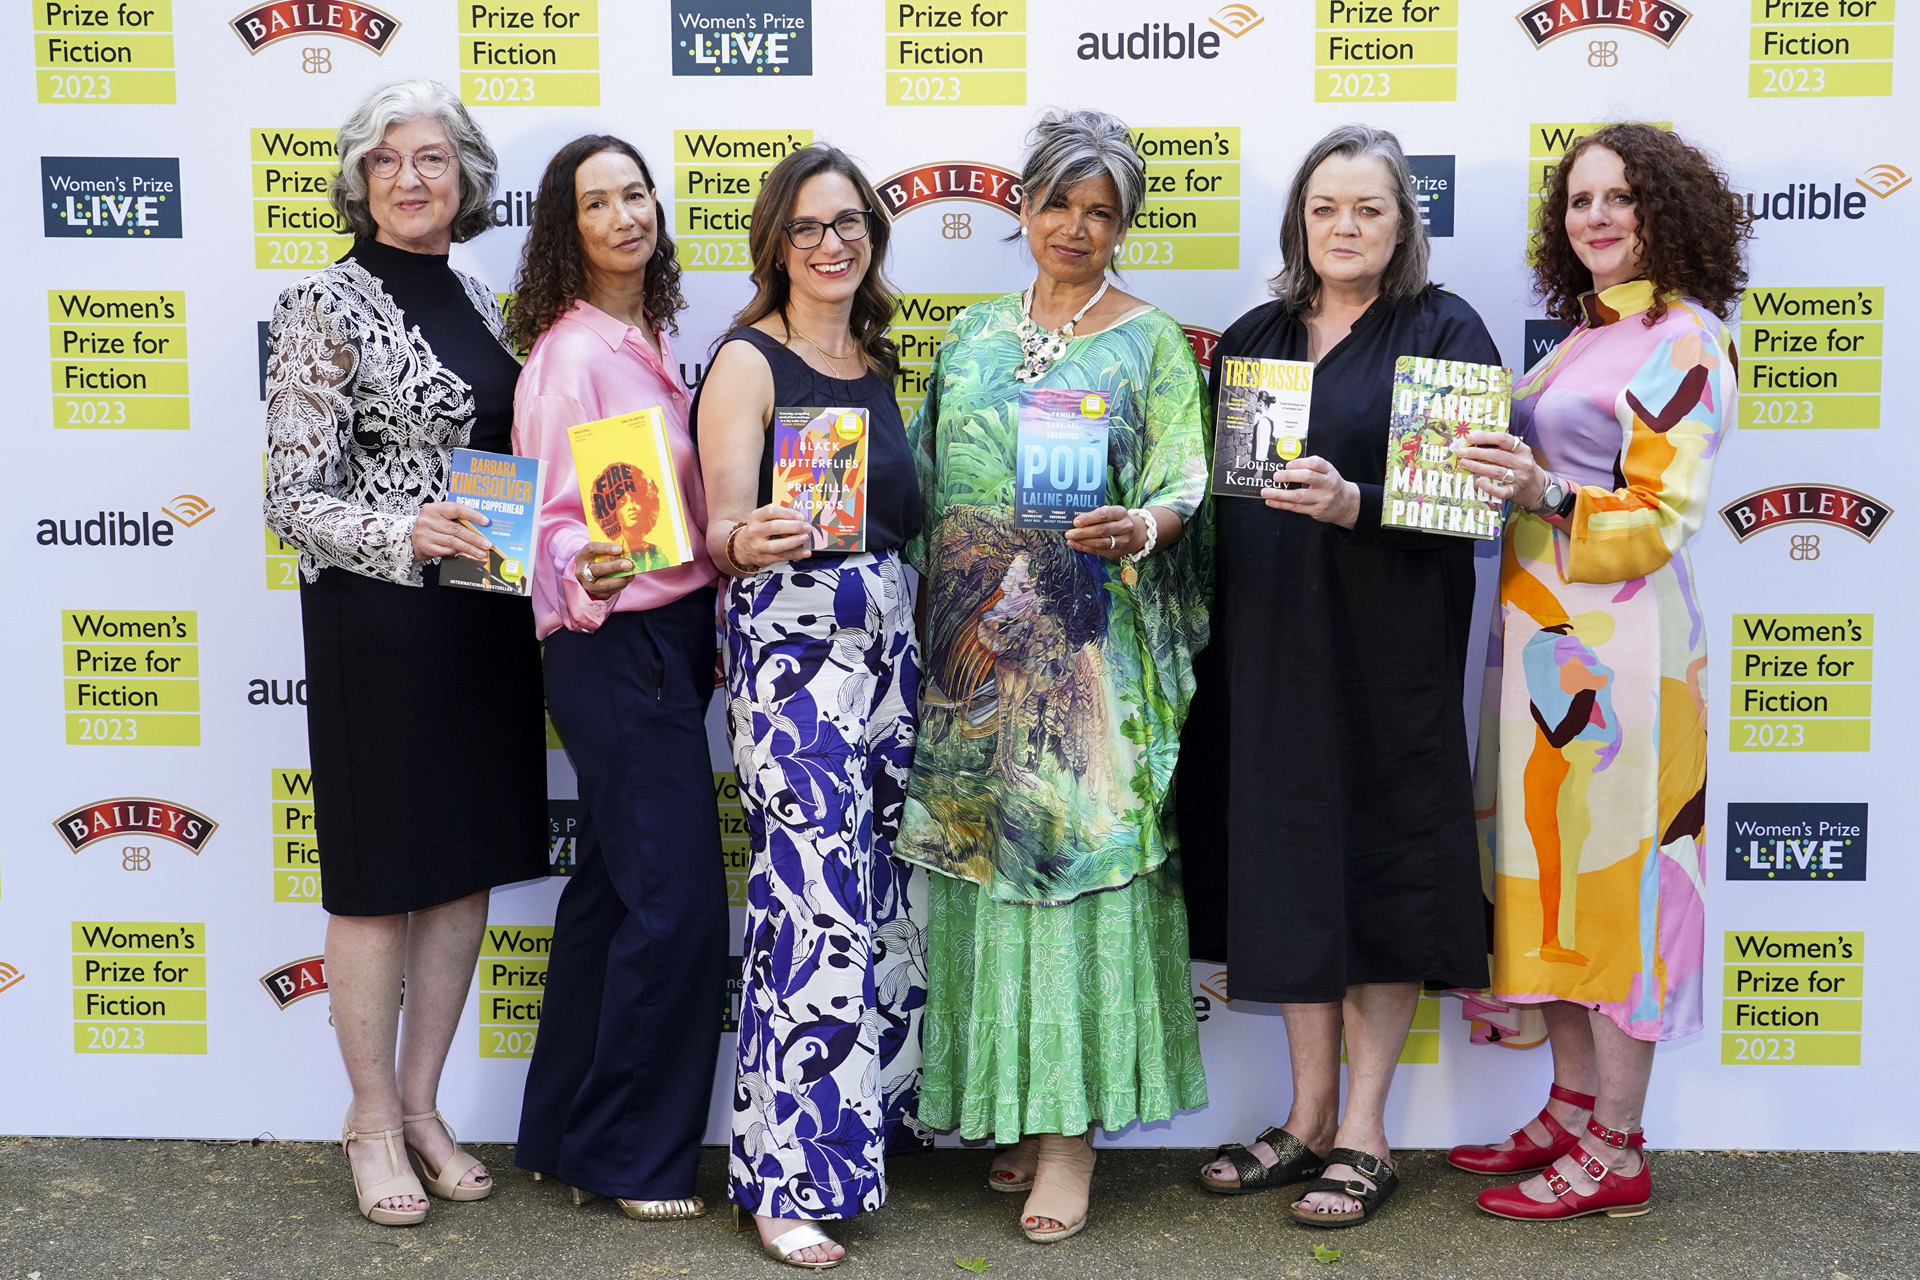 Authors Barbara Kingsolver, Jacqueline Crooks, Priscilla Morris, Laline Paull, Louise Kennedy and Maggie O’Farrell attend the 2023 Women's Prize For Fiction Winner's Ceremony